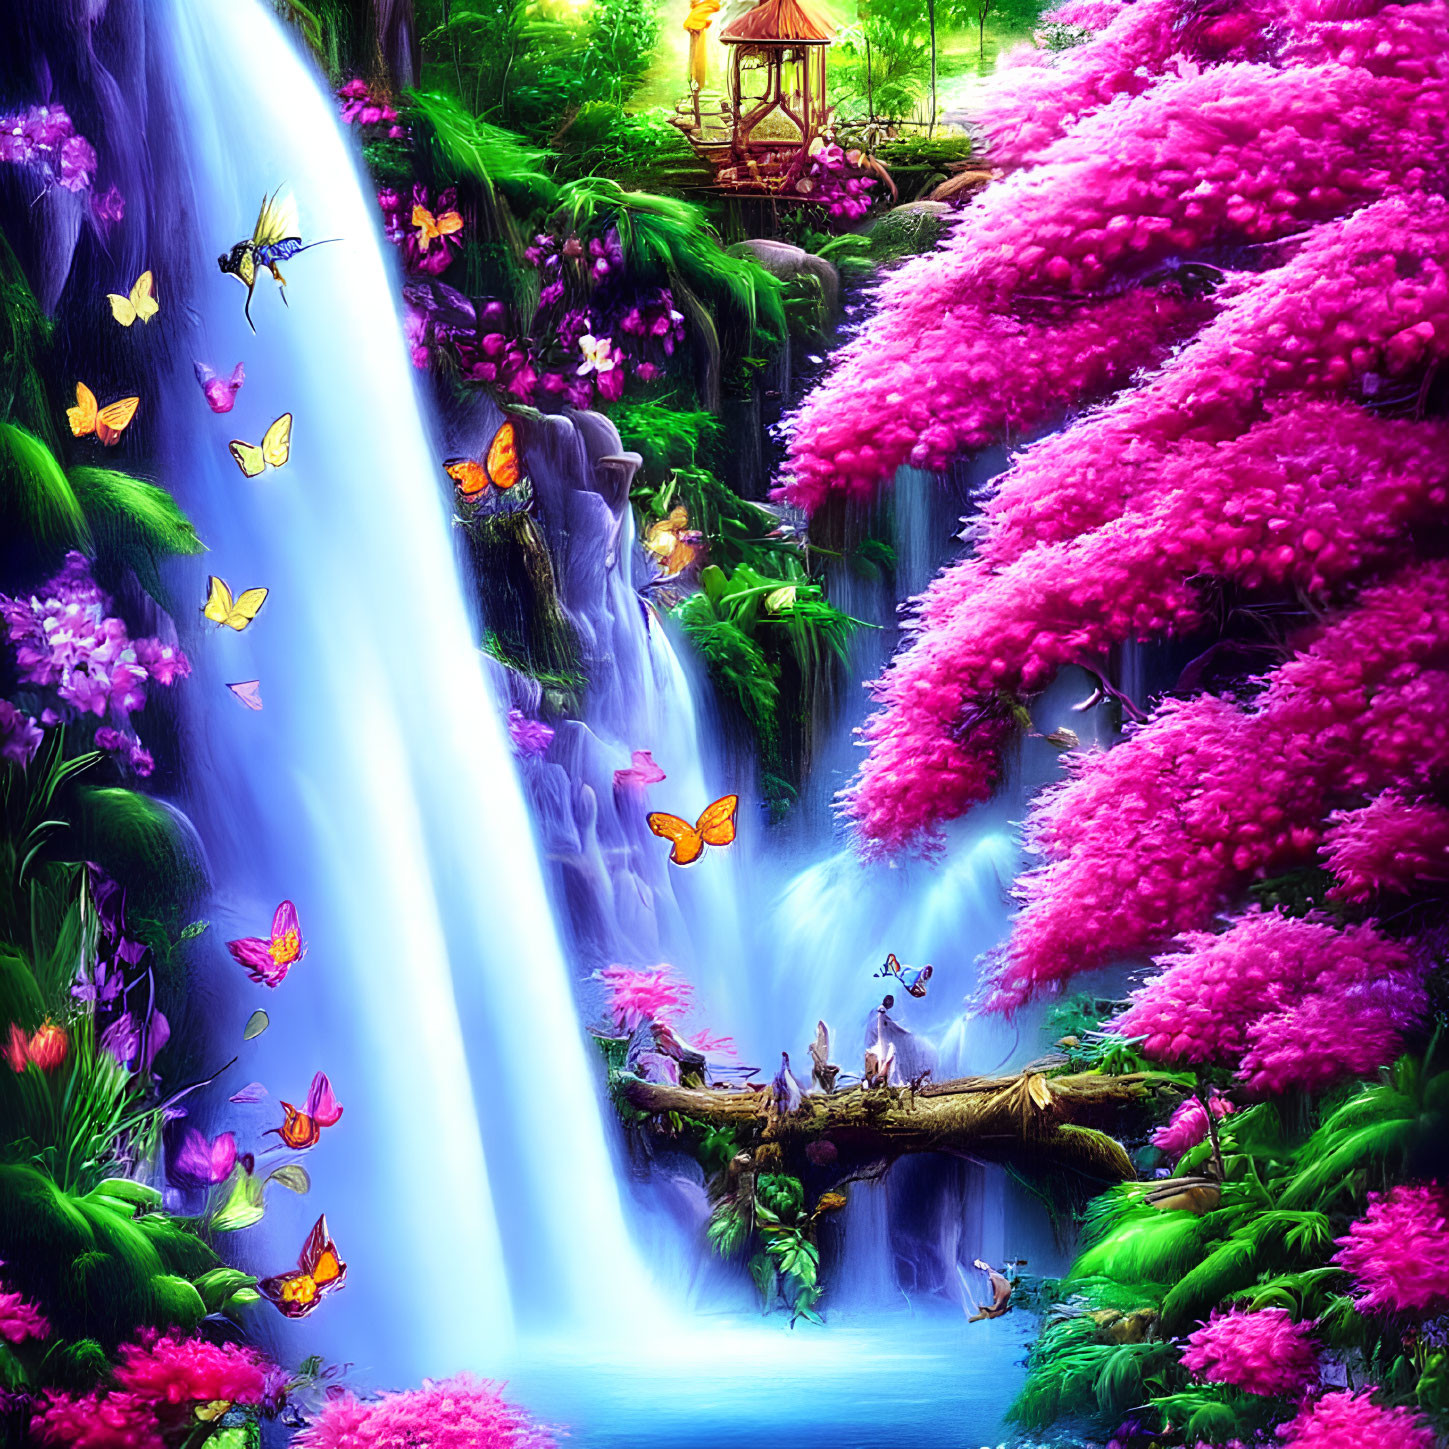 Fantasy waterfall with pink foliage, butterflies, and mystical lantern